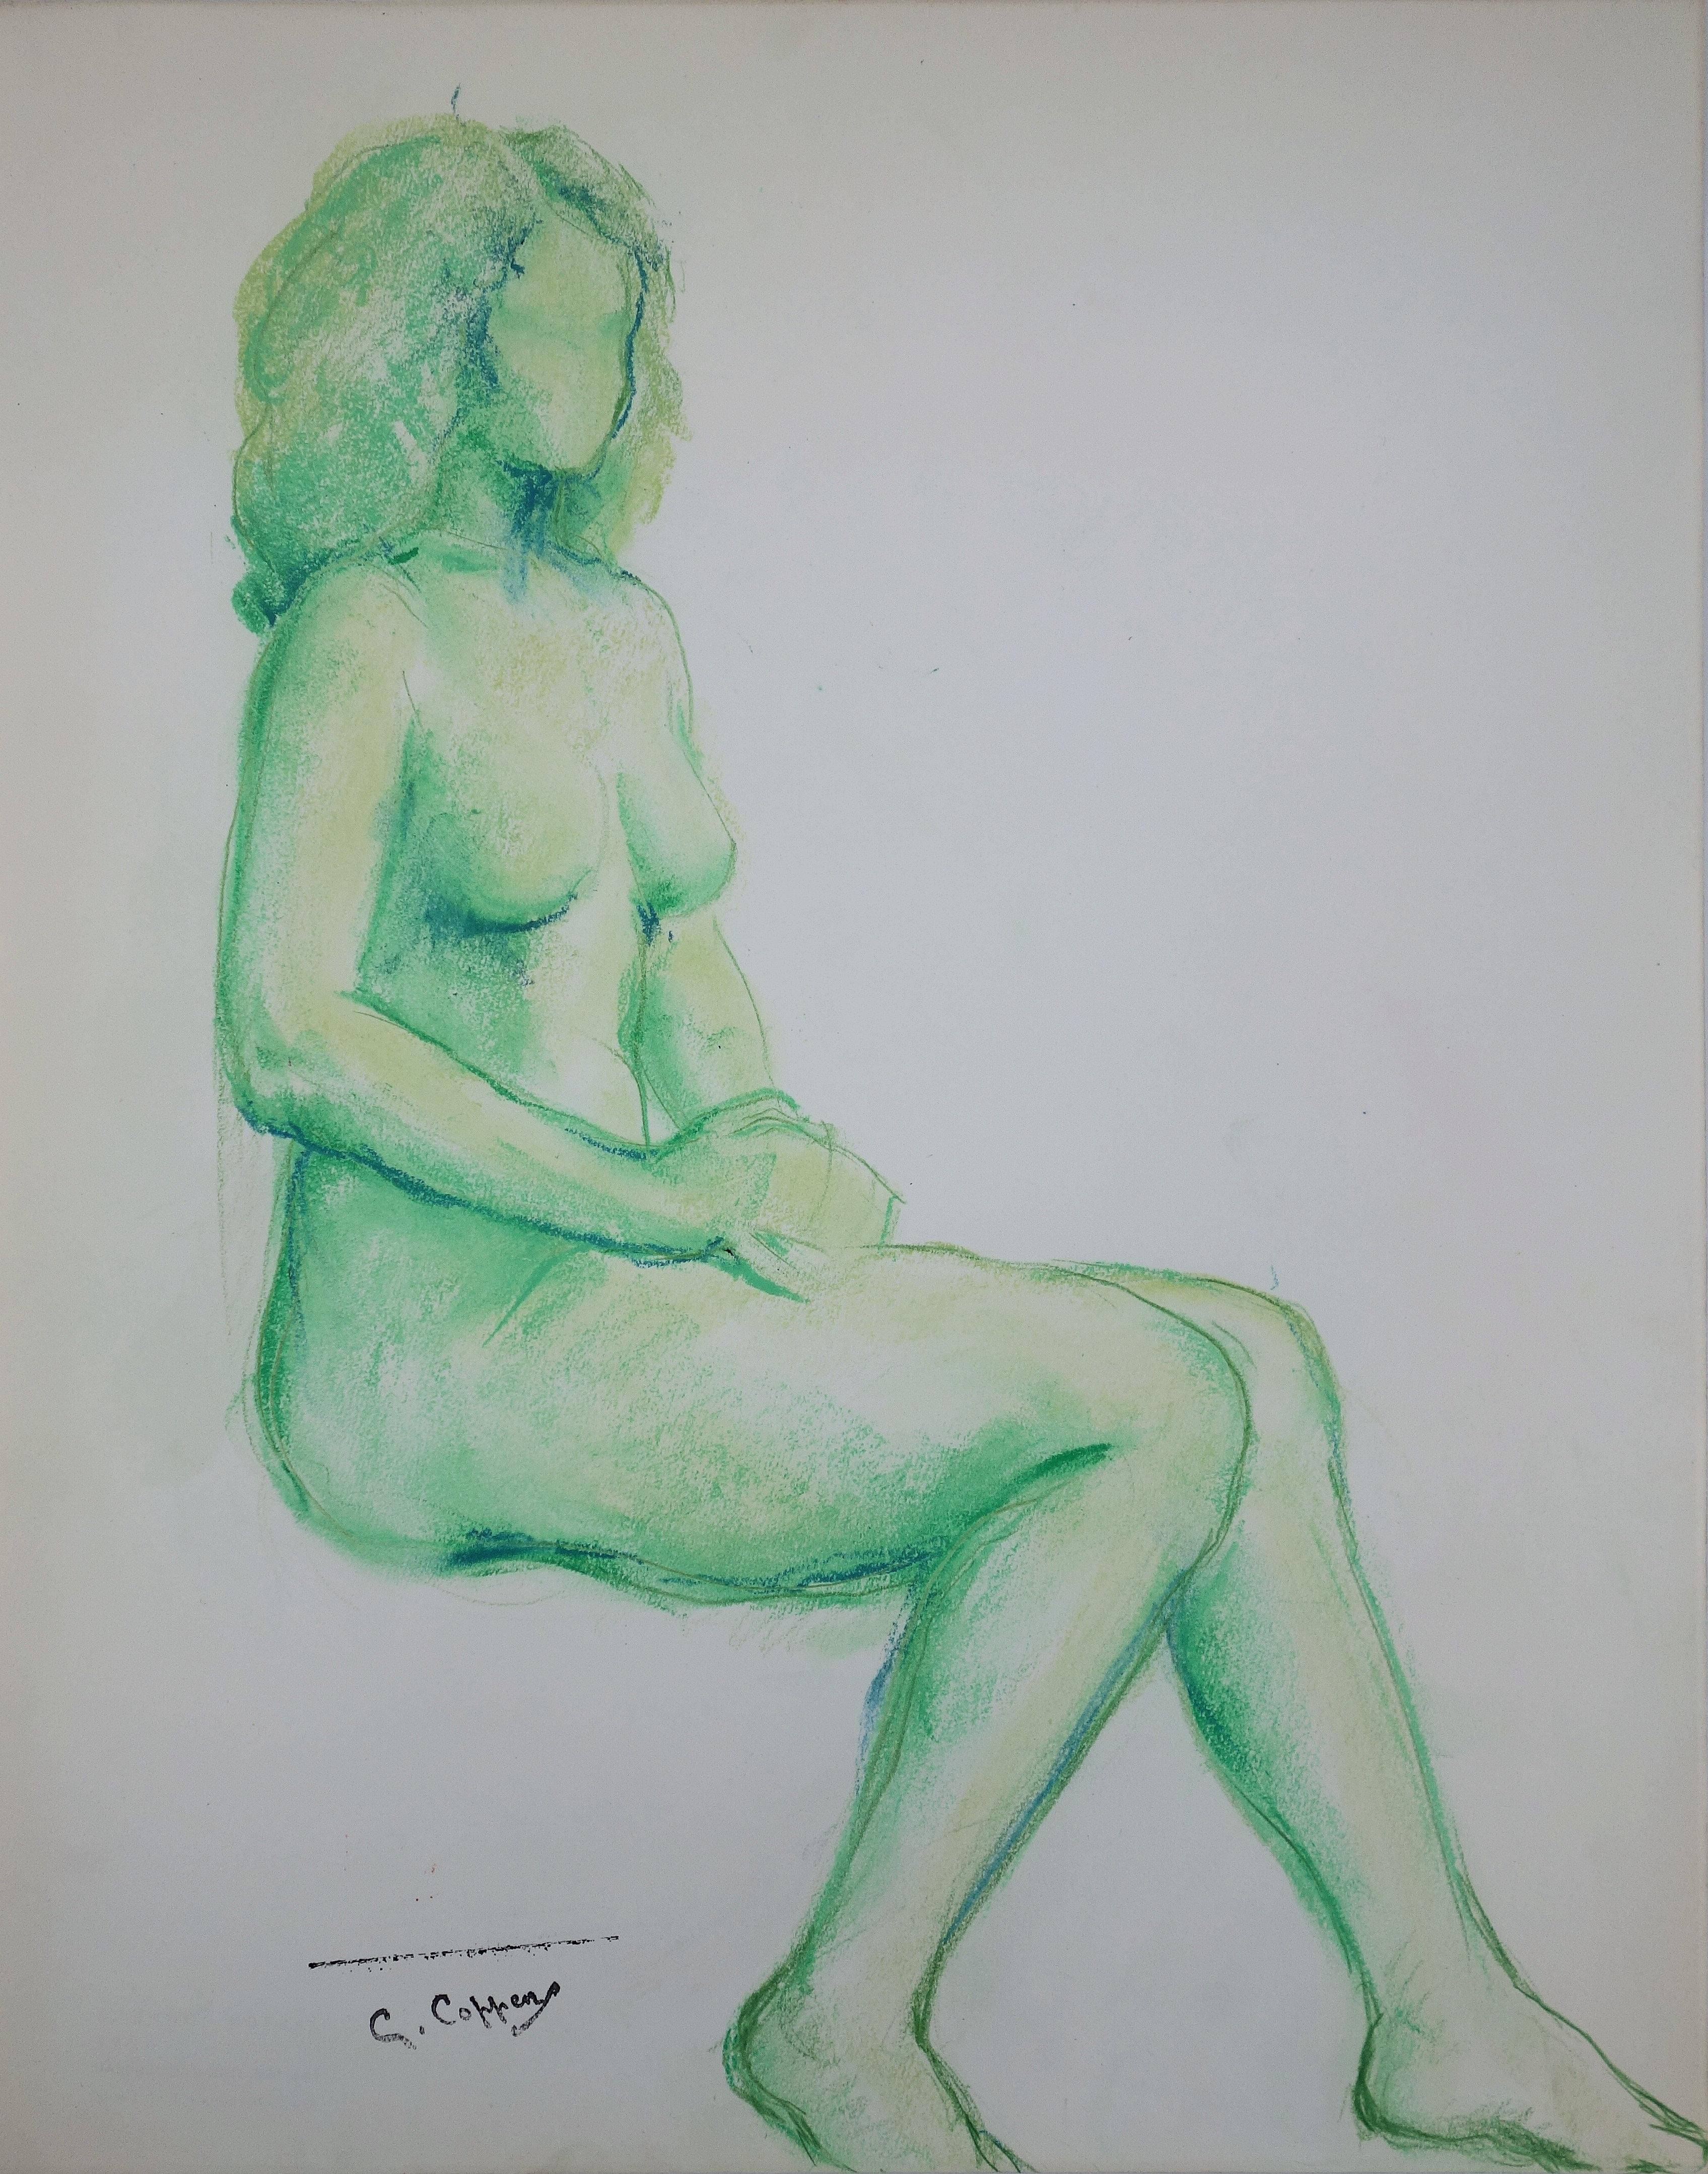 Nude in Green - Original charcoals drawing - Art by Gaston Coppens